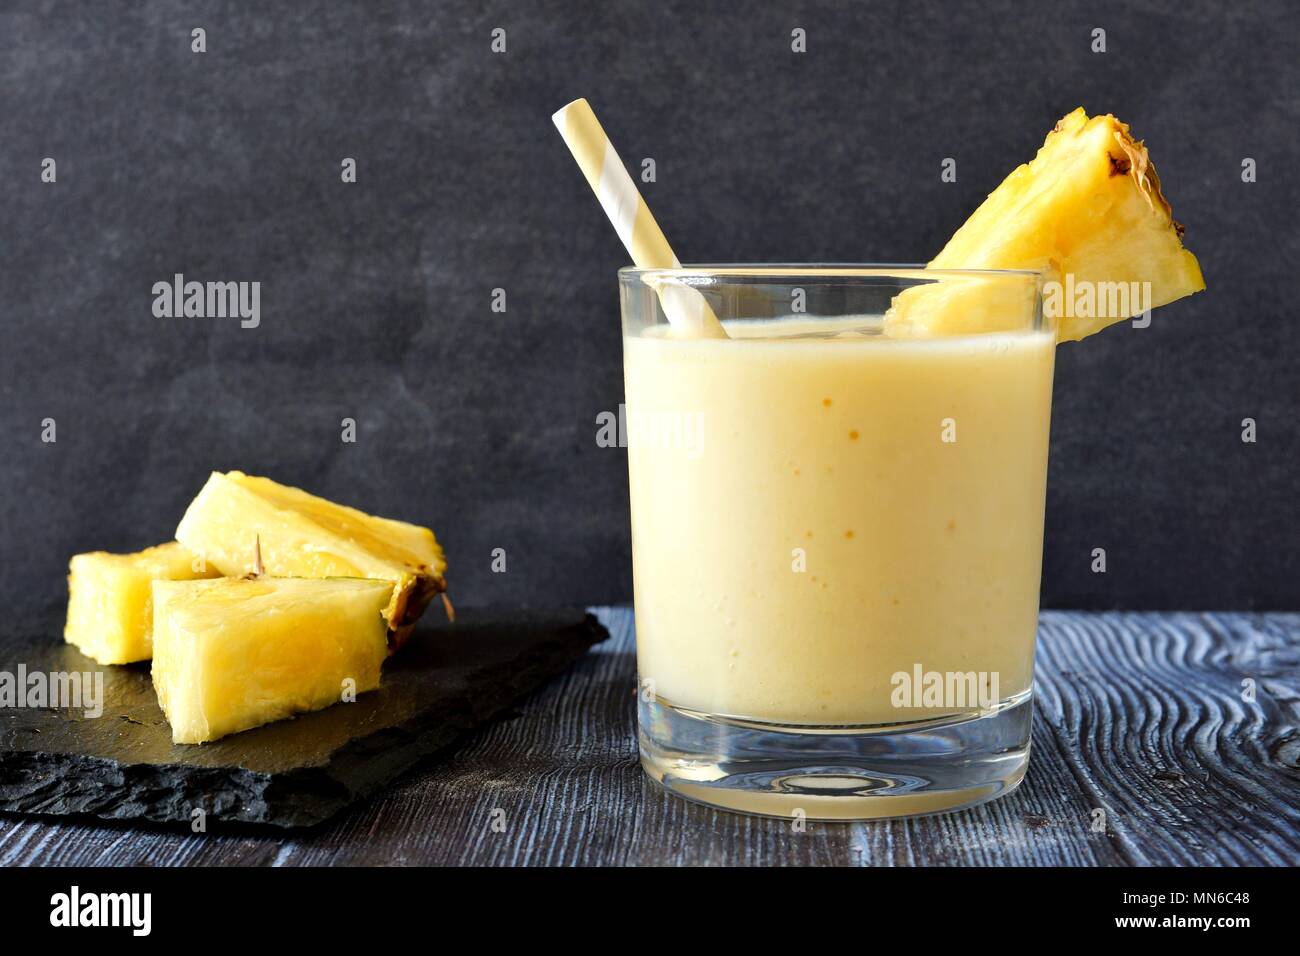 Healthy pineapple smoothie in a glass with straw against a dark background Stock Photo